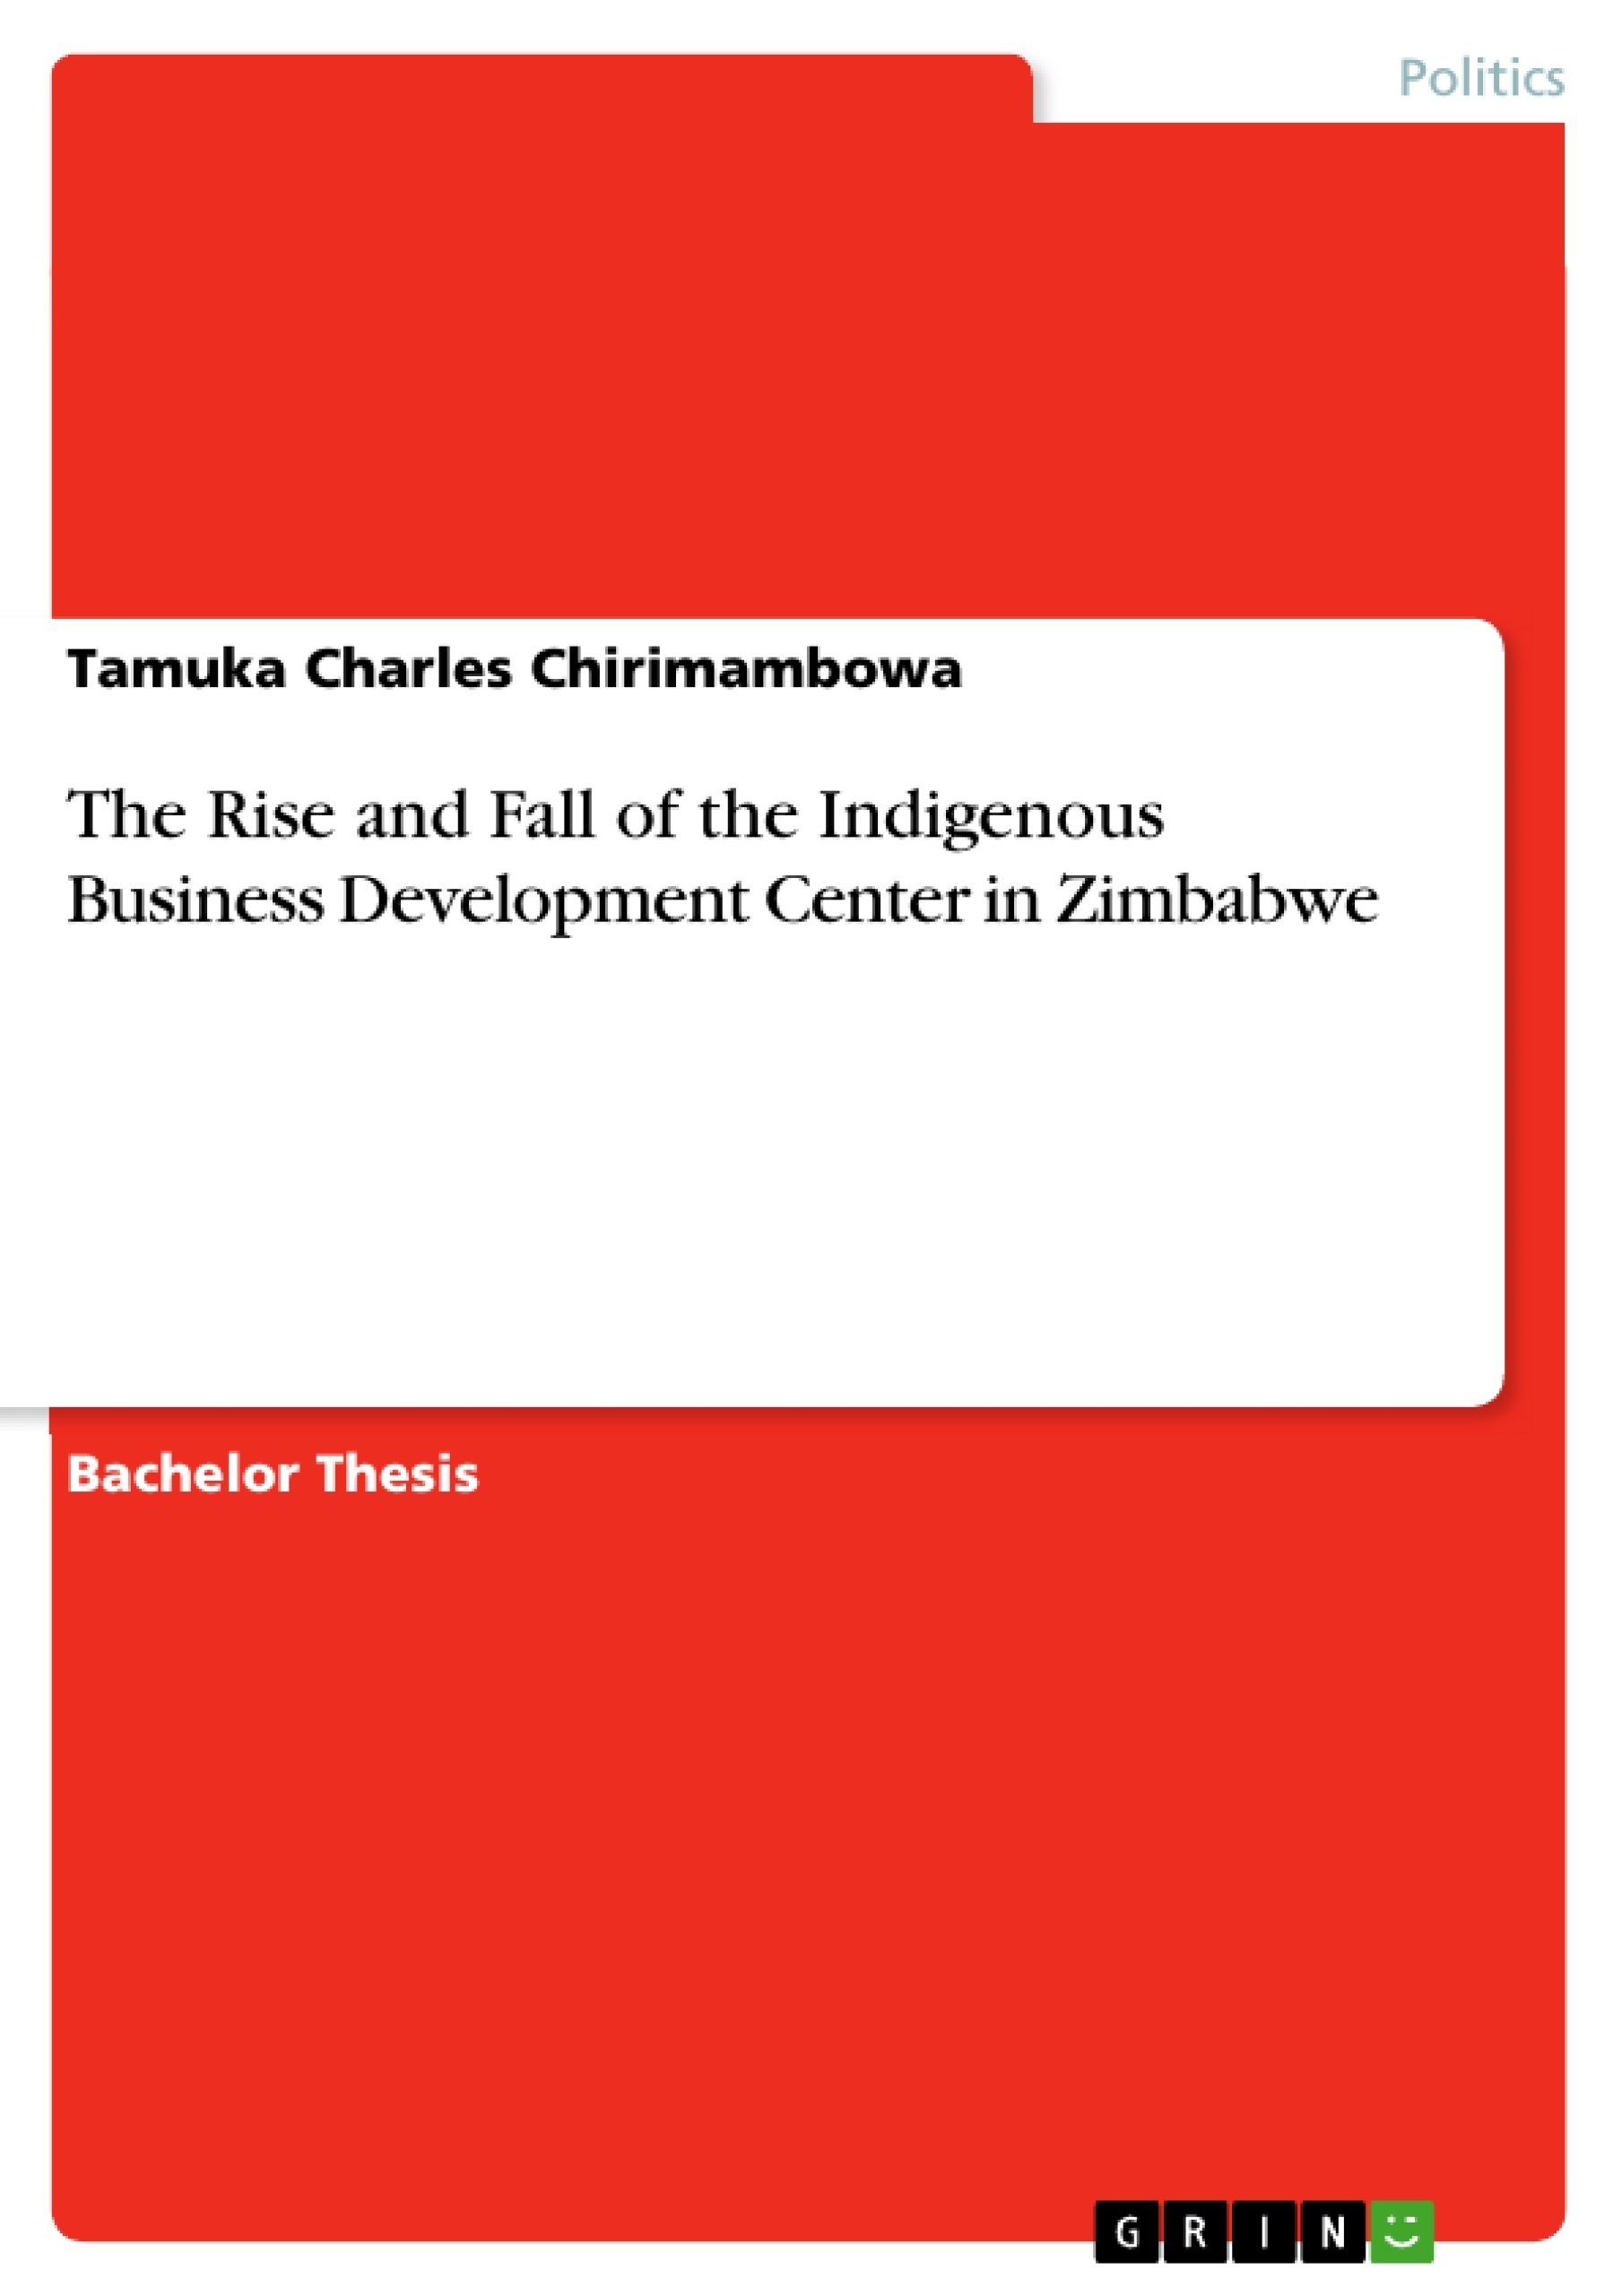 Title: The Rise and Fall of the Indigenous Business Development Center in Zimbabwe